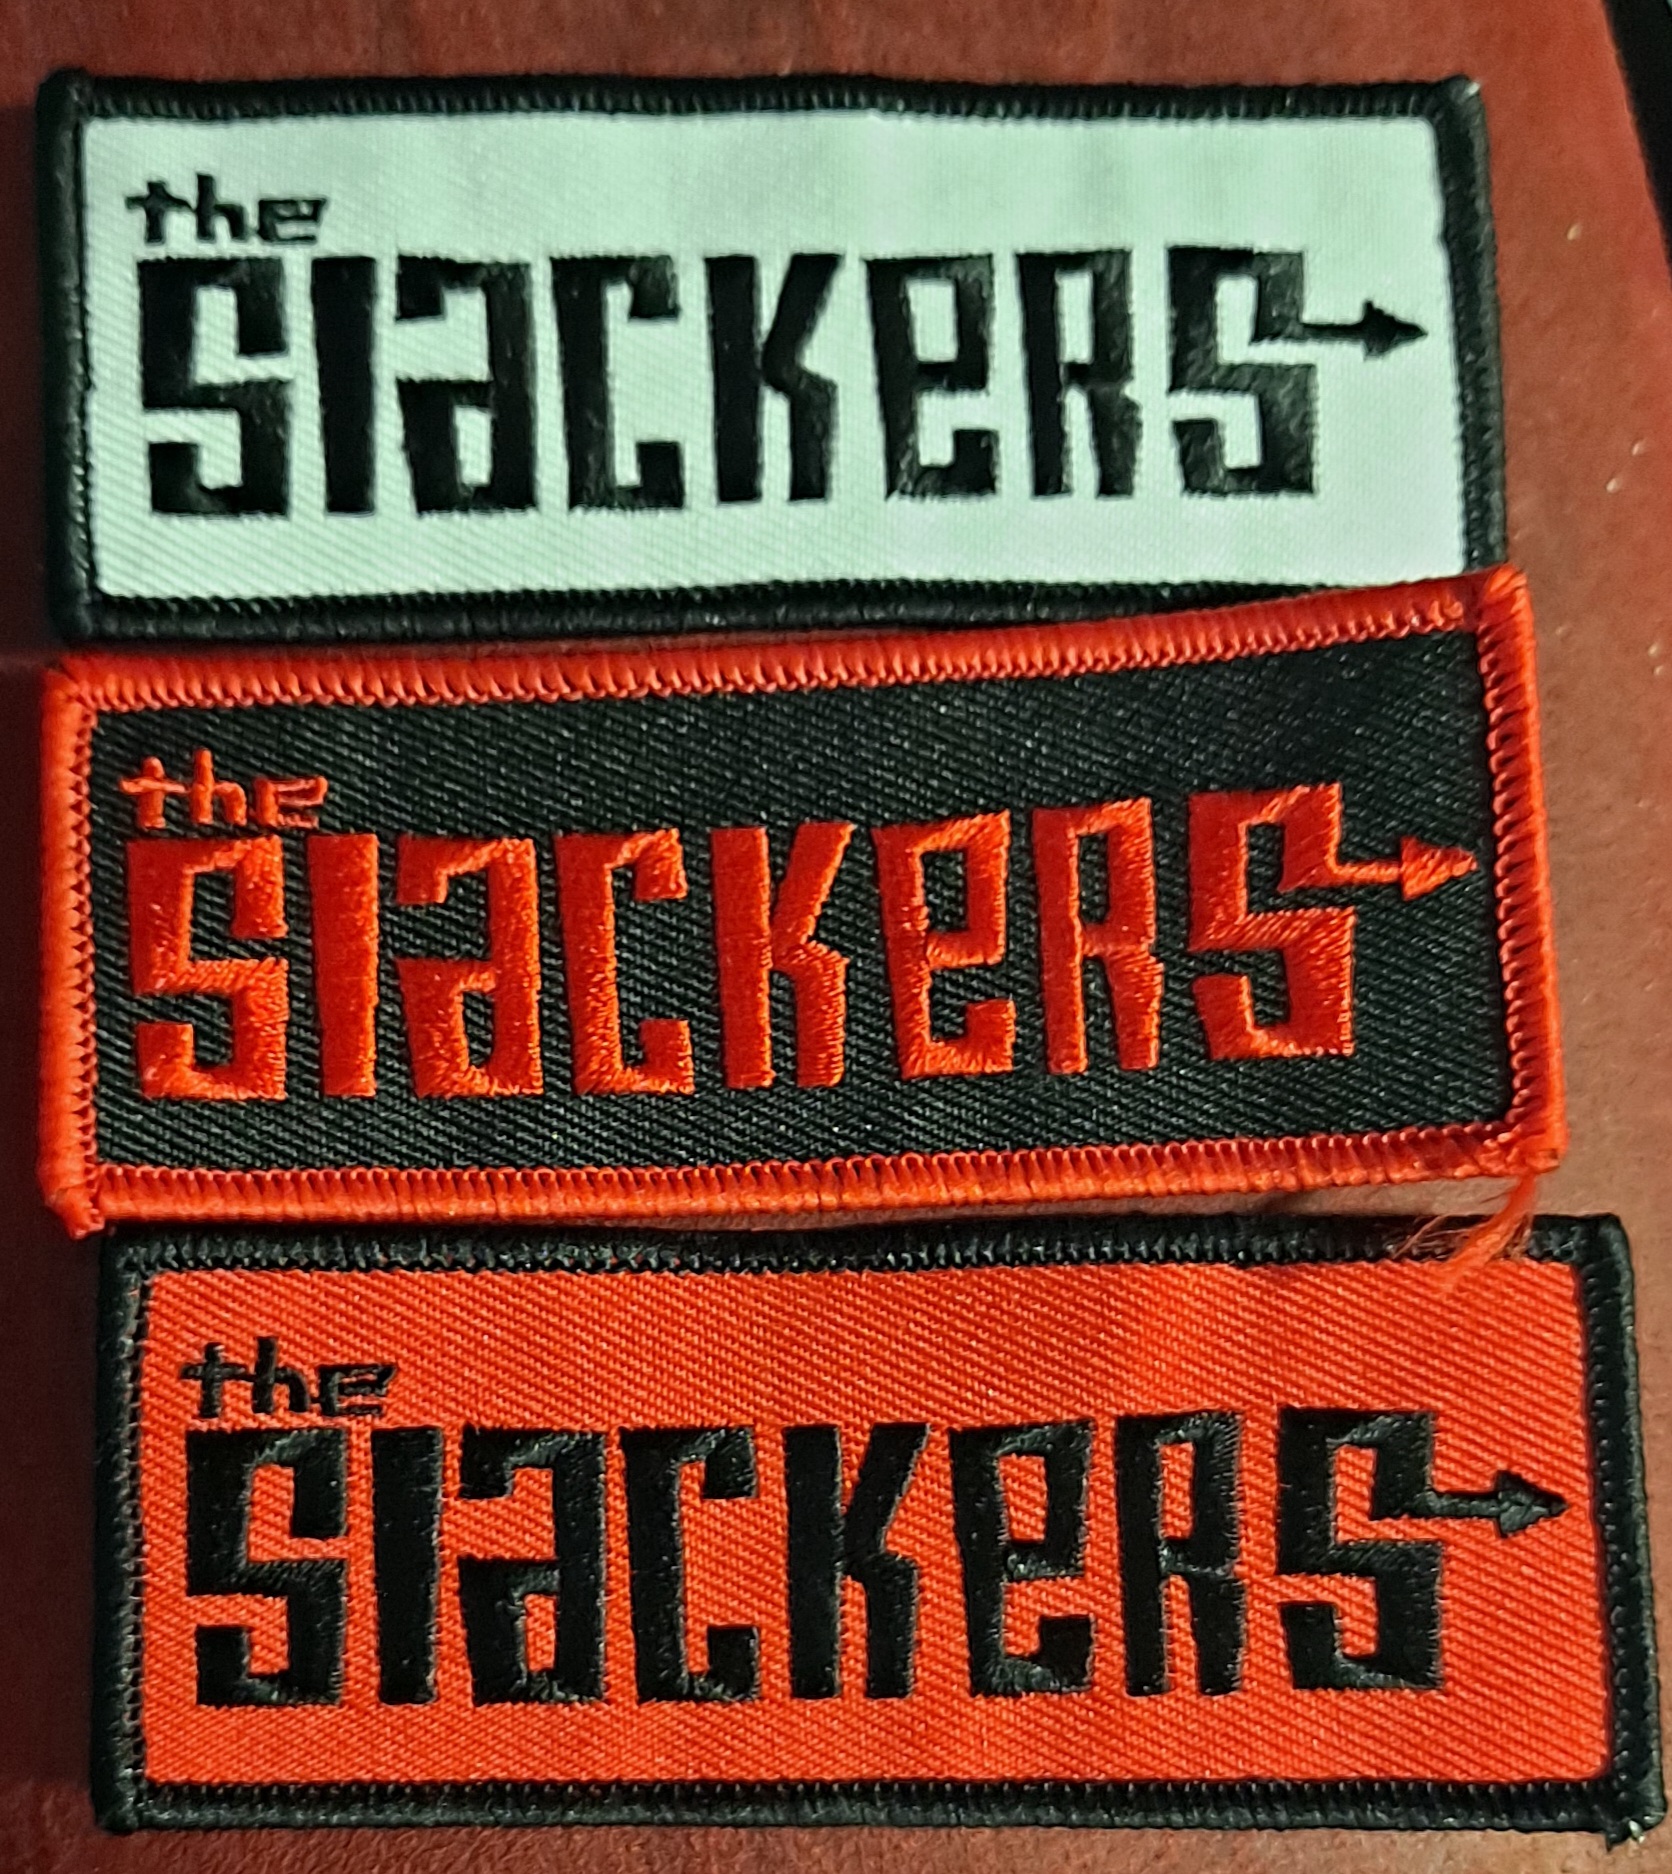 The Slackers Patches!